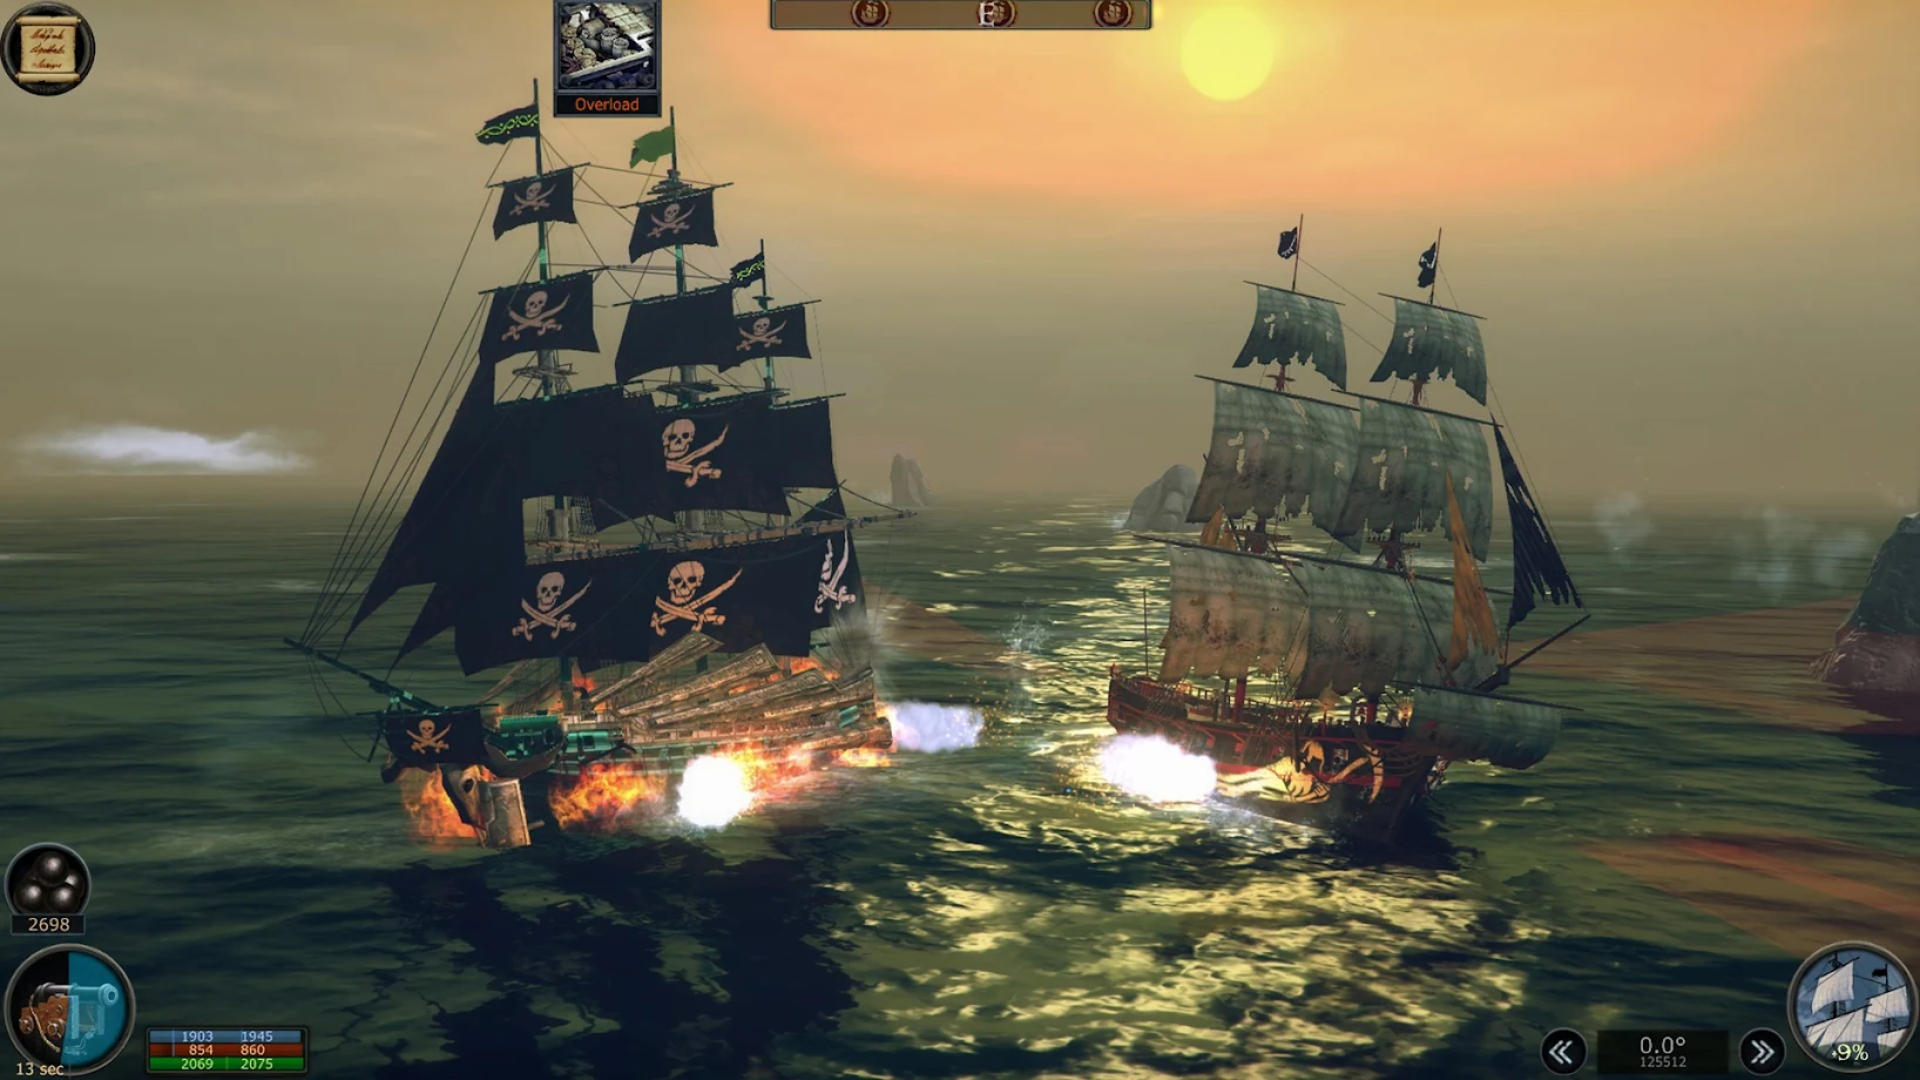 The Best Mobile Pirate Games of 2021